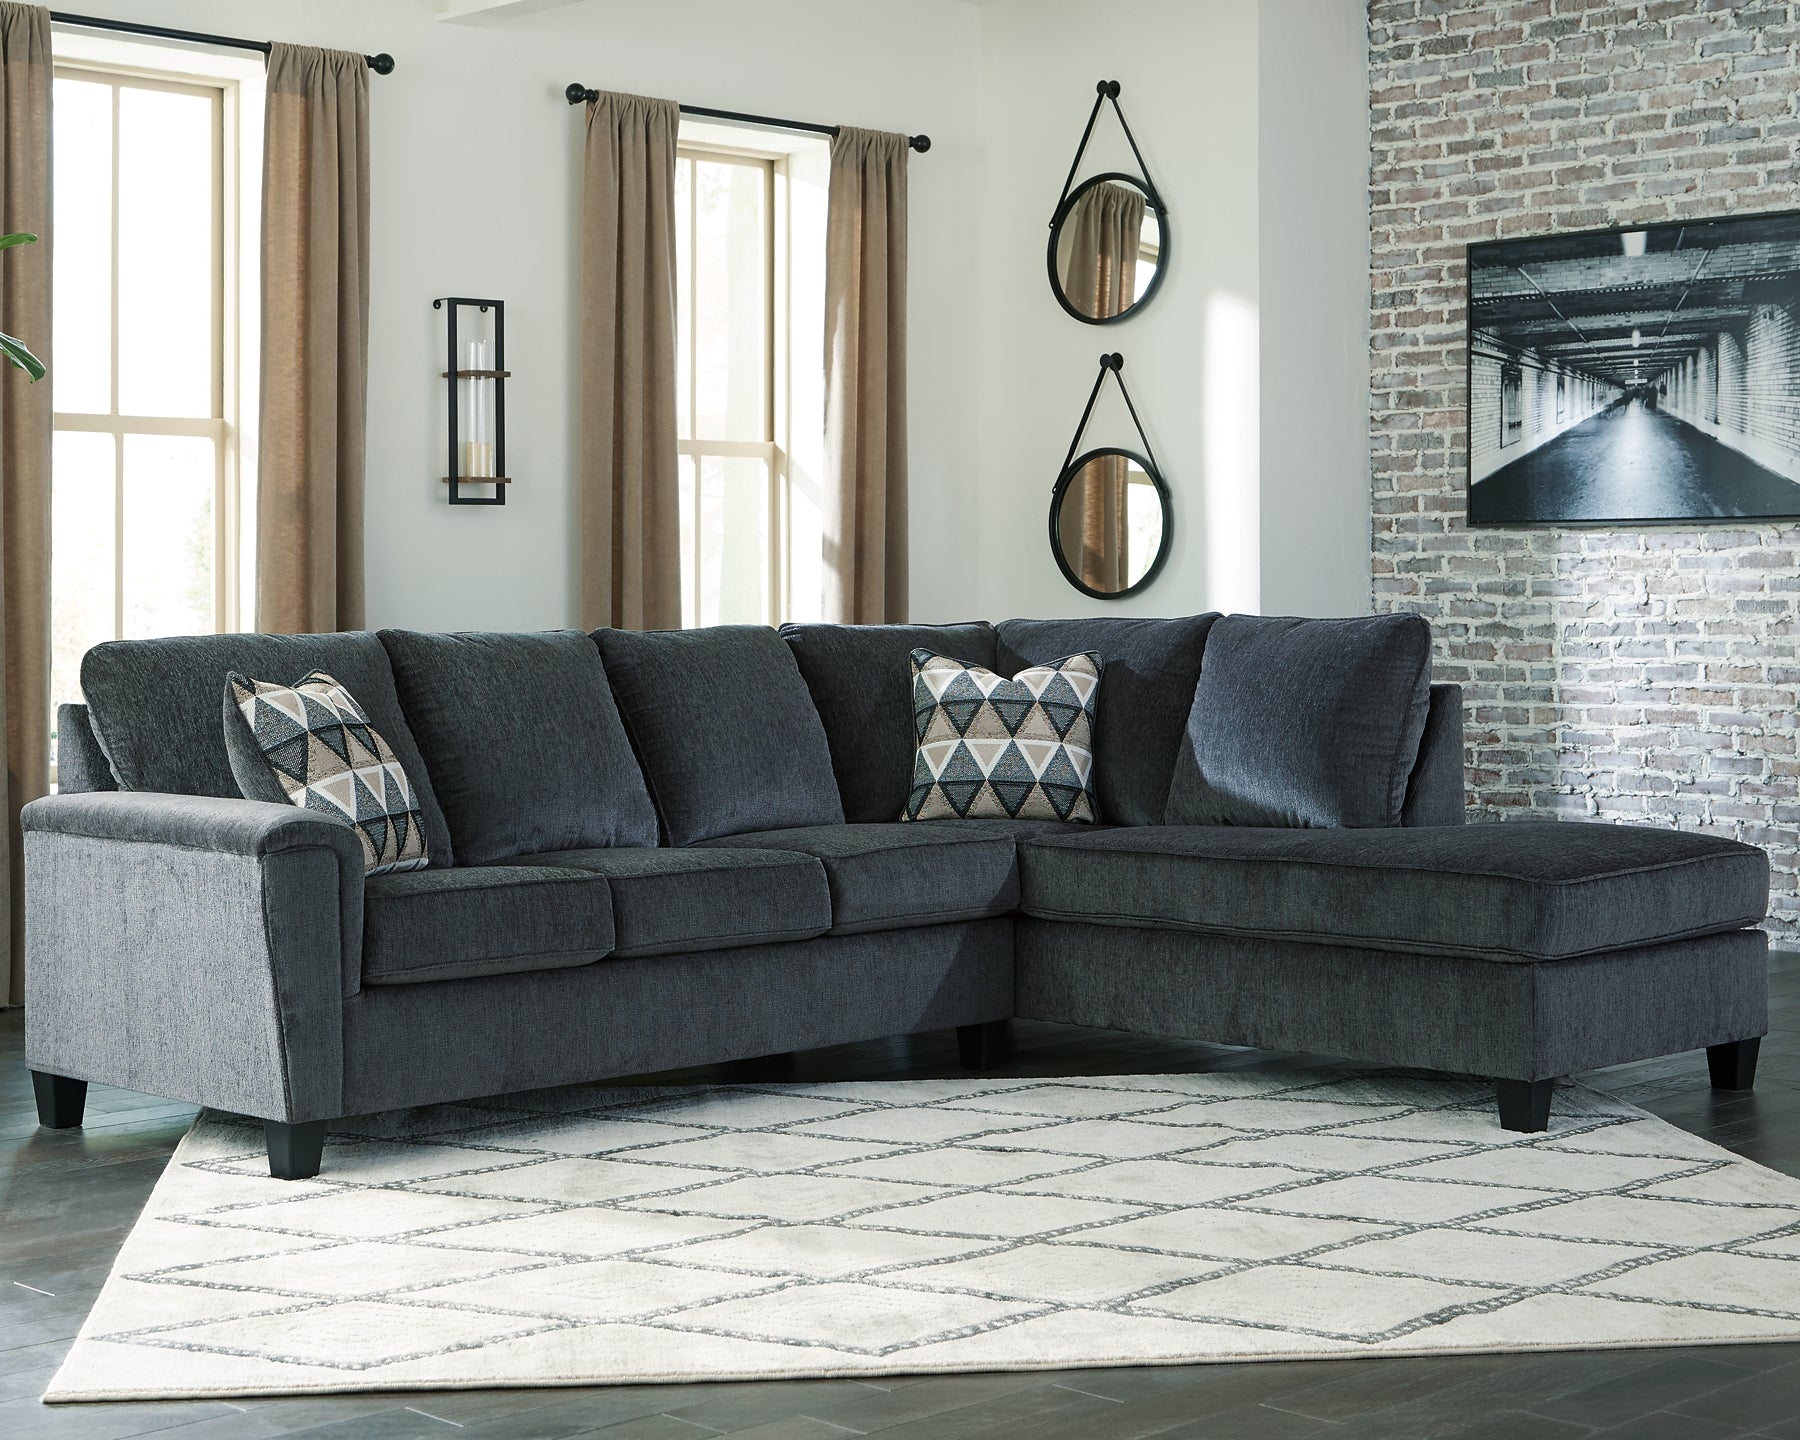 Abinger 2-Piece Sectional with Chaise Wilson Furniture (OH)  in Bridgeport, Ohio. Serving Bridgeport, Yorkville, Bellaire, & Avondale